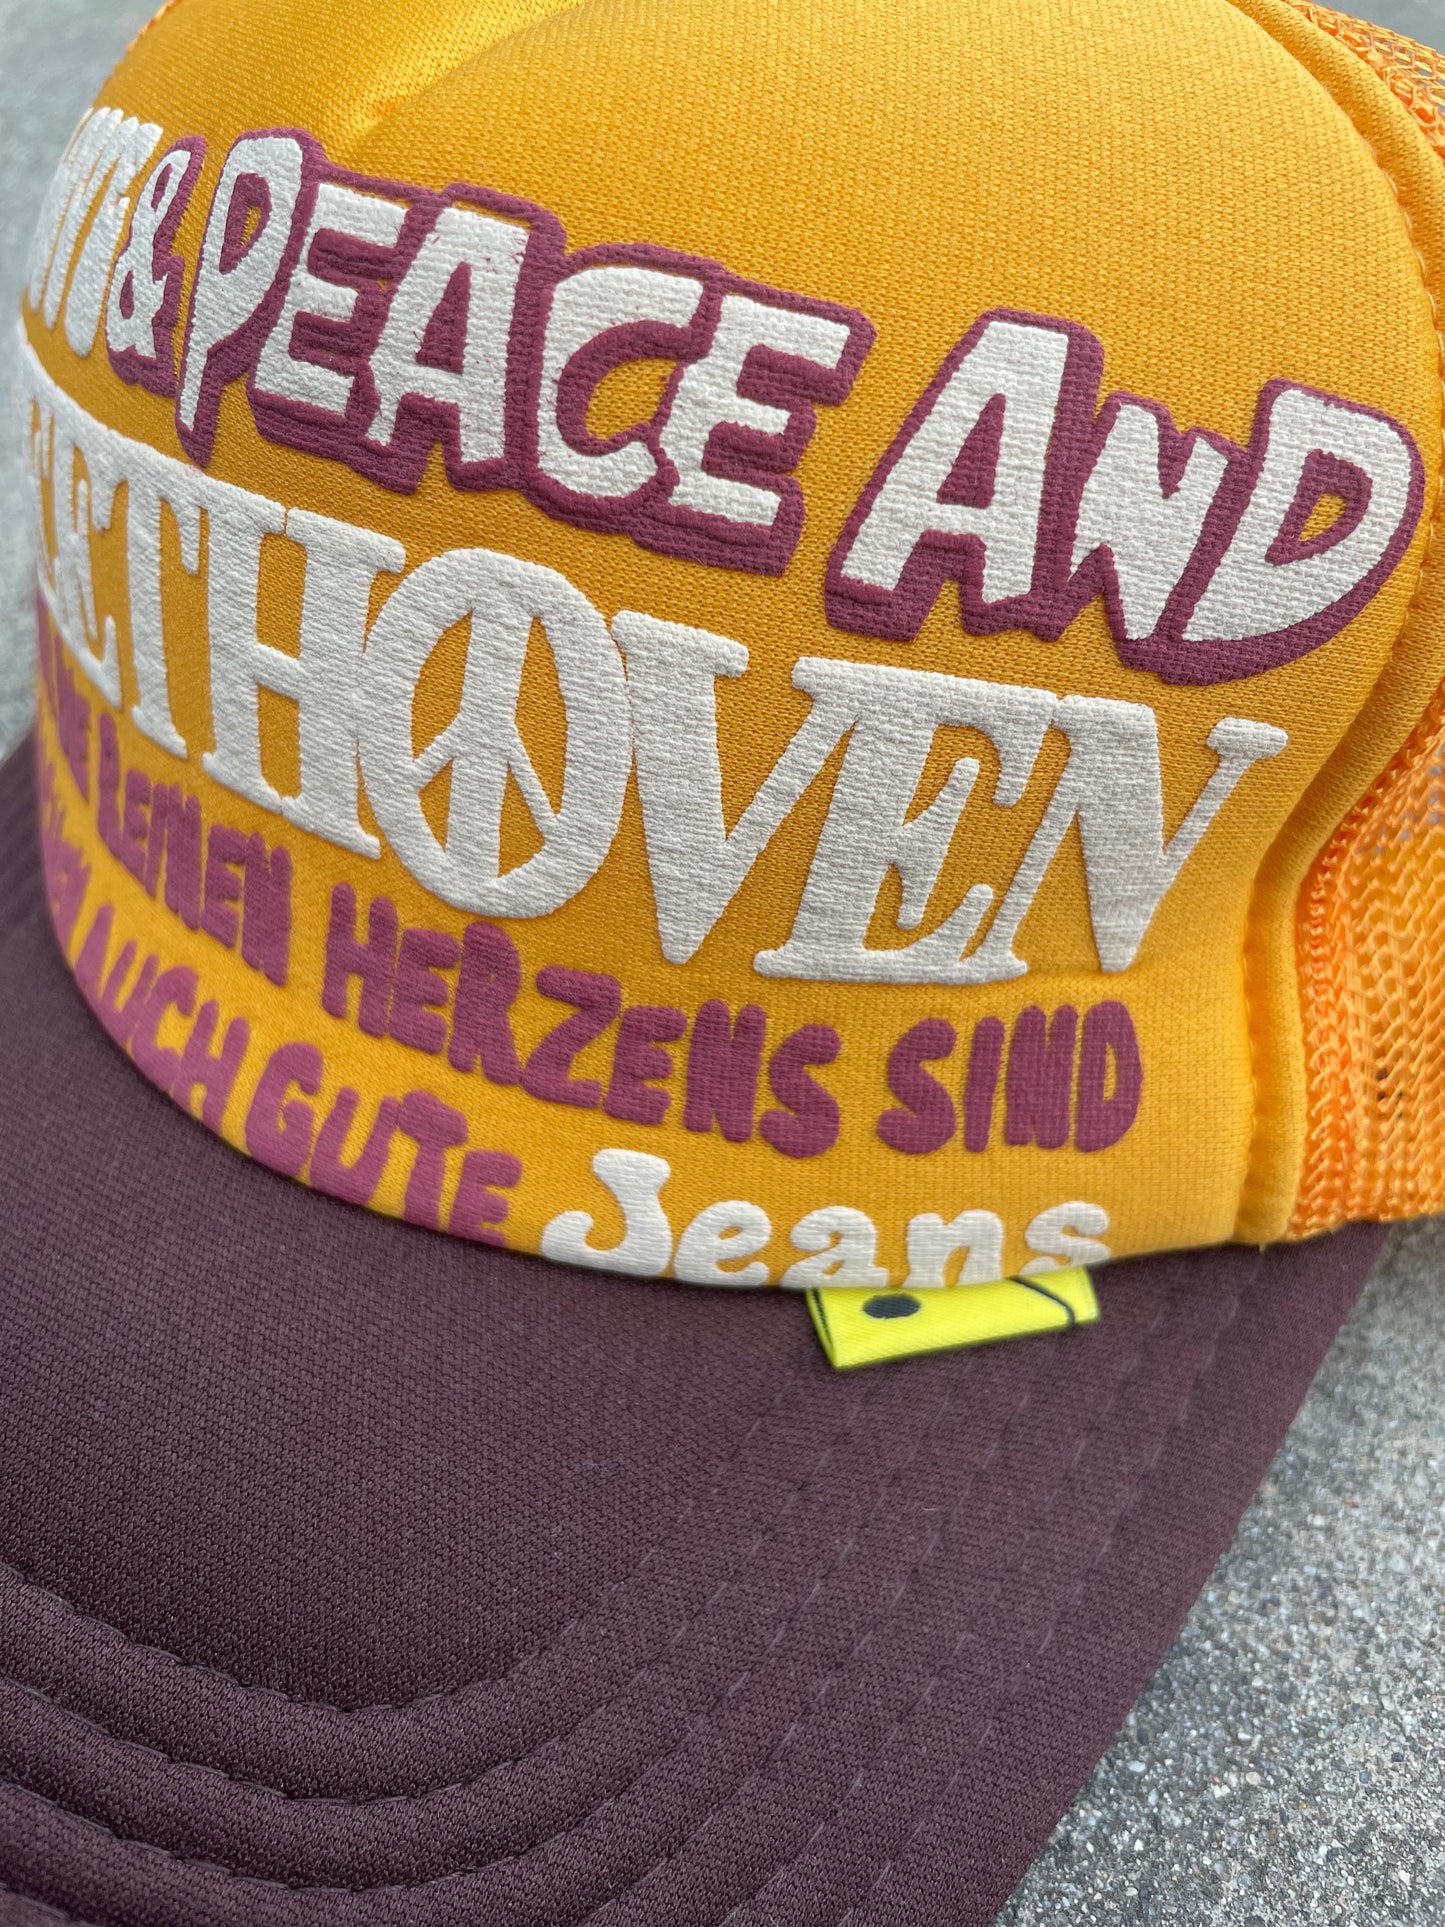 Kapital Kountry Love and Peace and Beethoven Yellow Trucker Hat